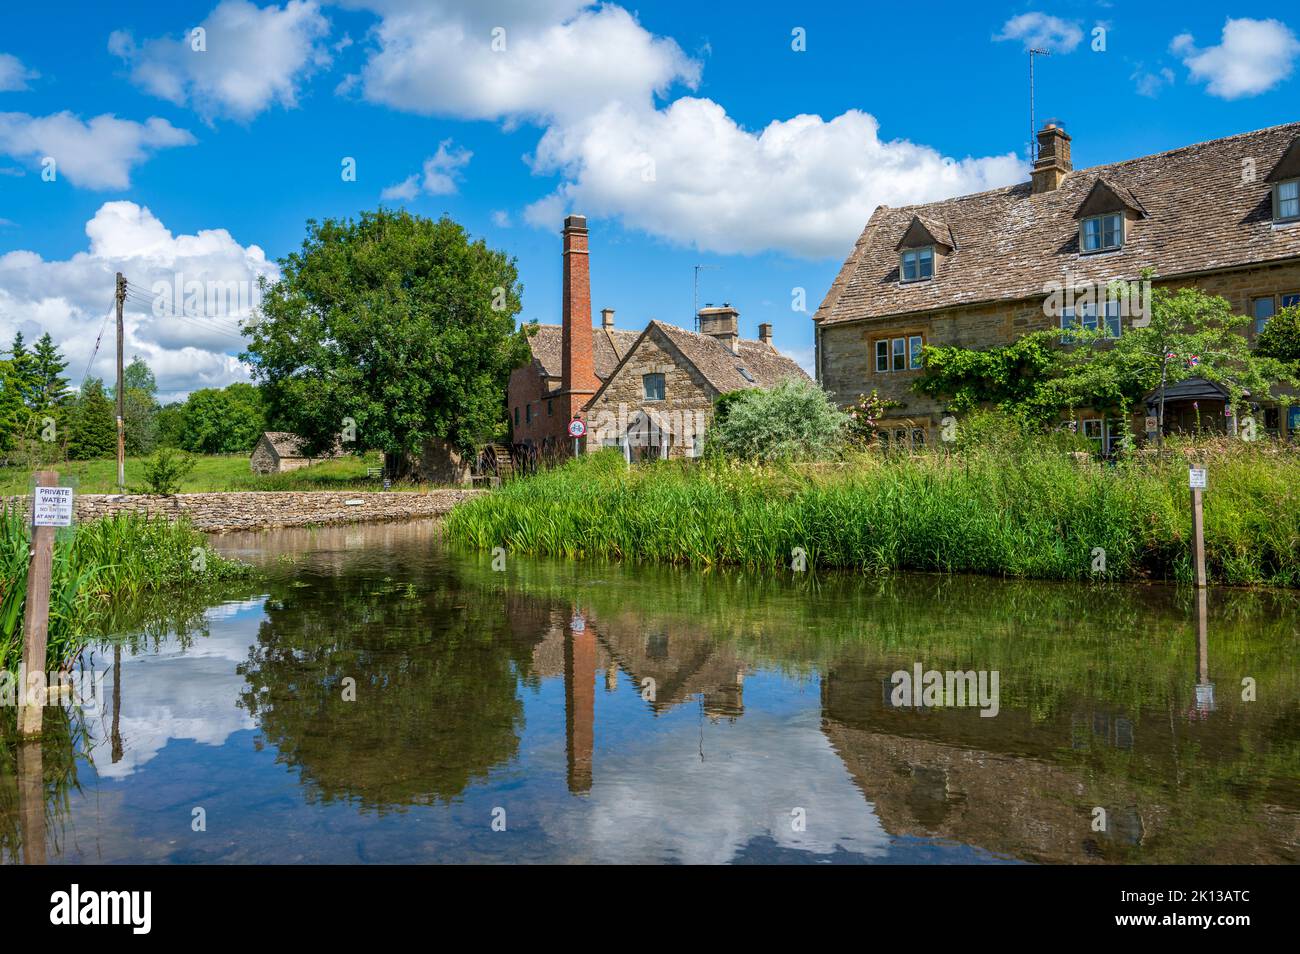 Mill and cottages on River Eye, Lower Slaughter, Cotswolds, Gloucestershire, England, United Kingdom, Europe Stock Photo